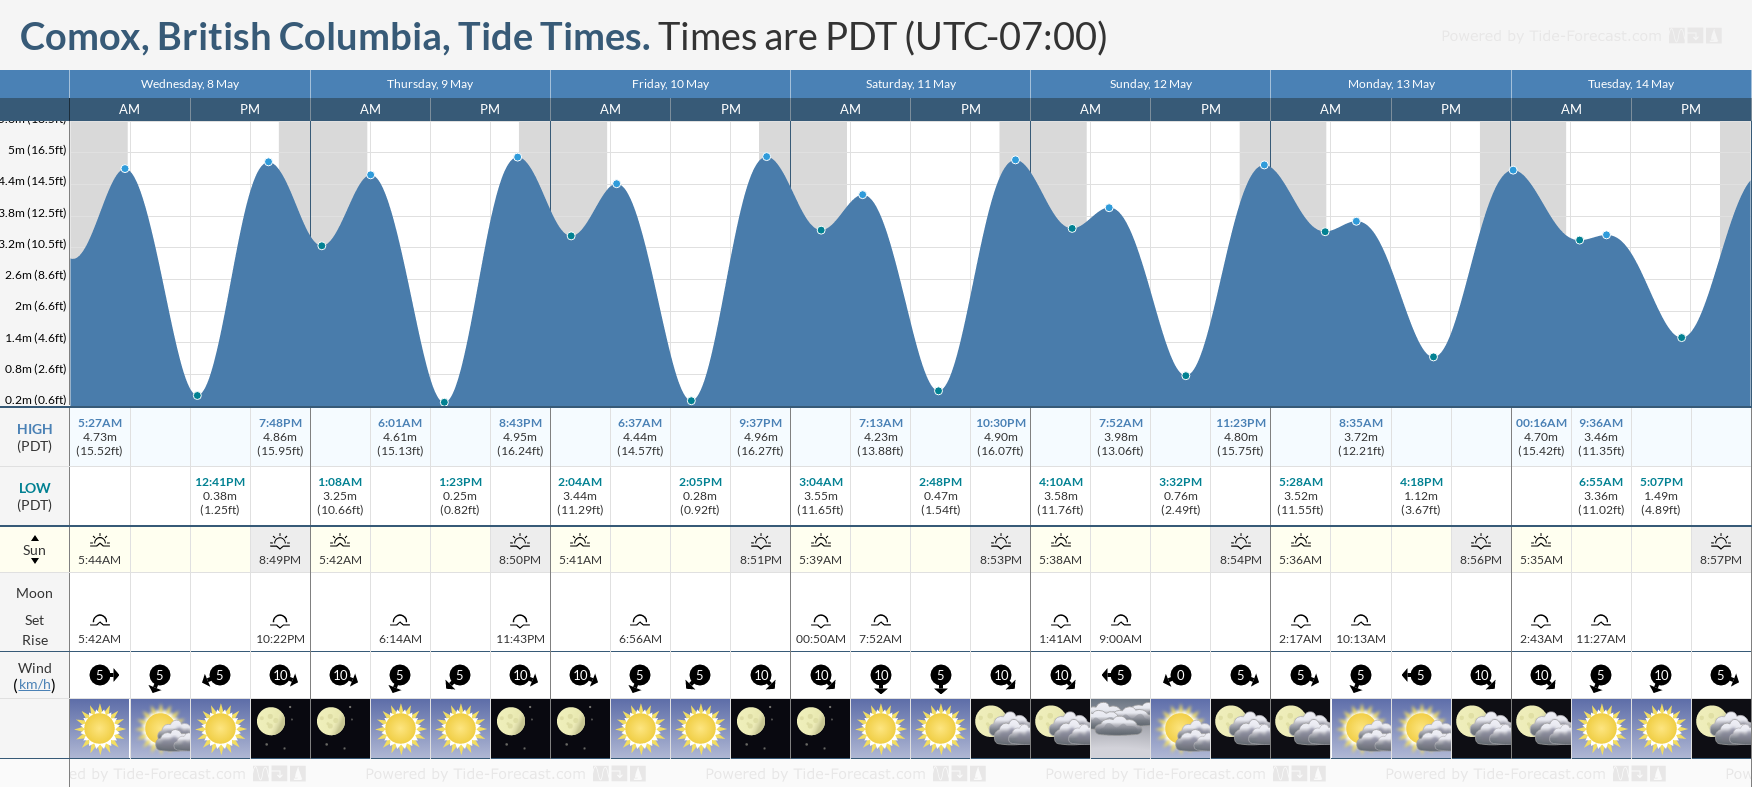 Comox, British Columbia Tide Chart including high and low tide tide times for the next 7 days